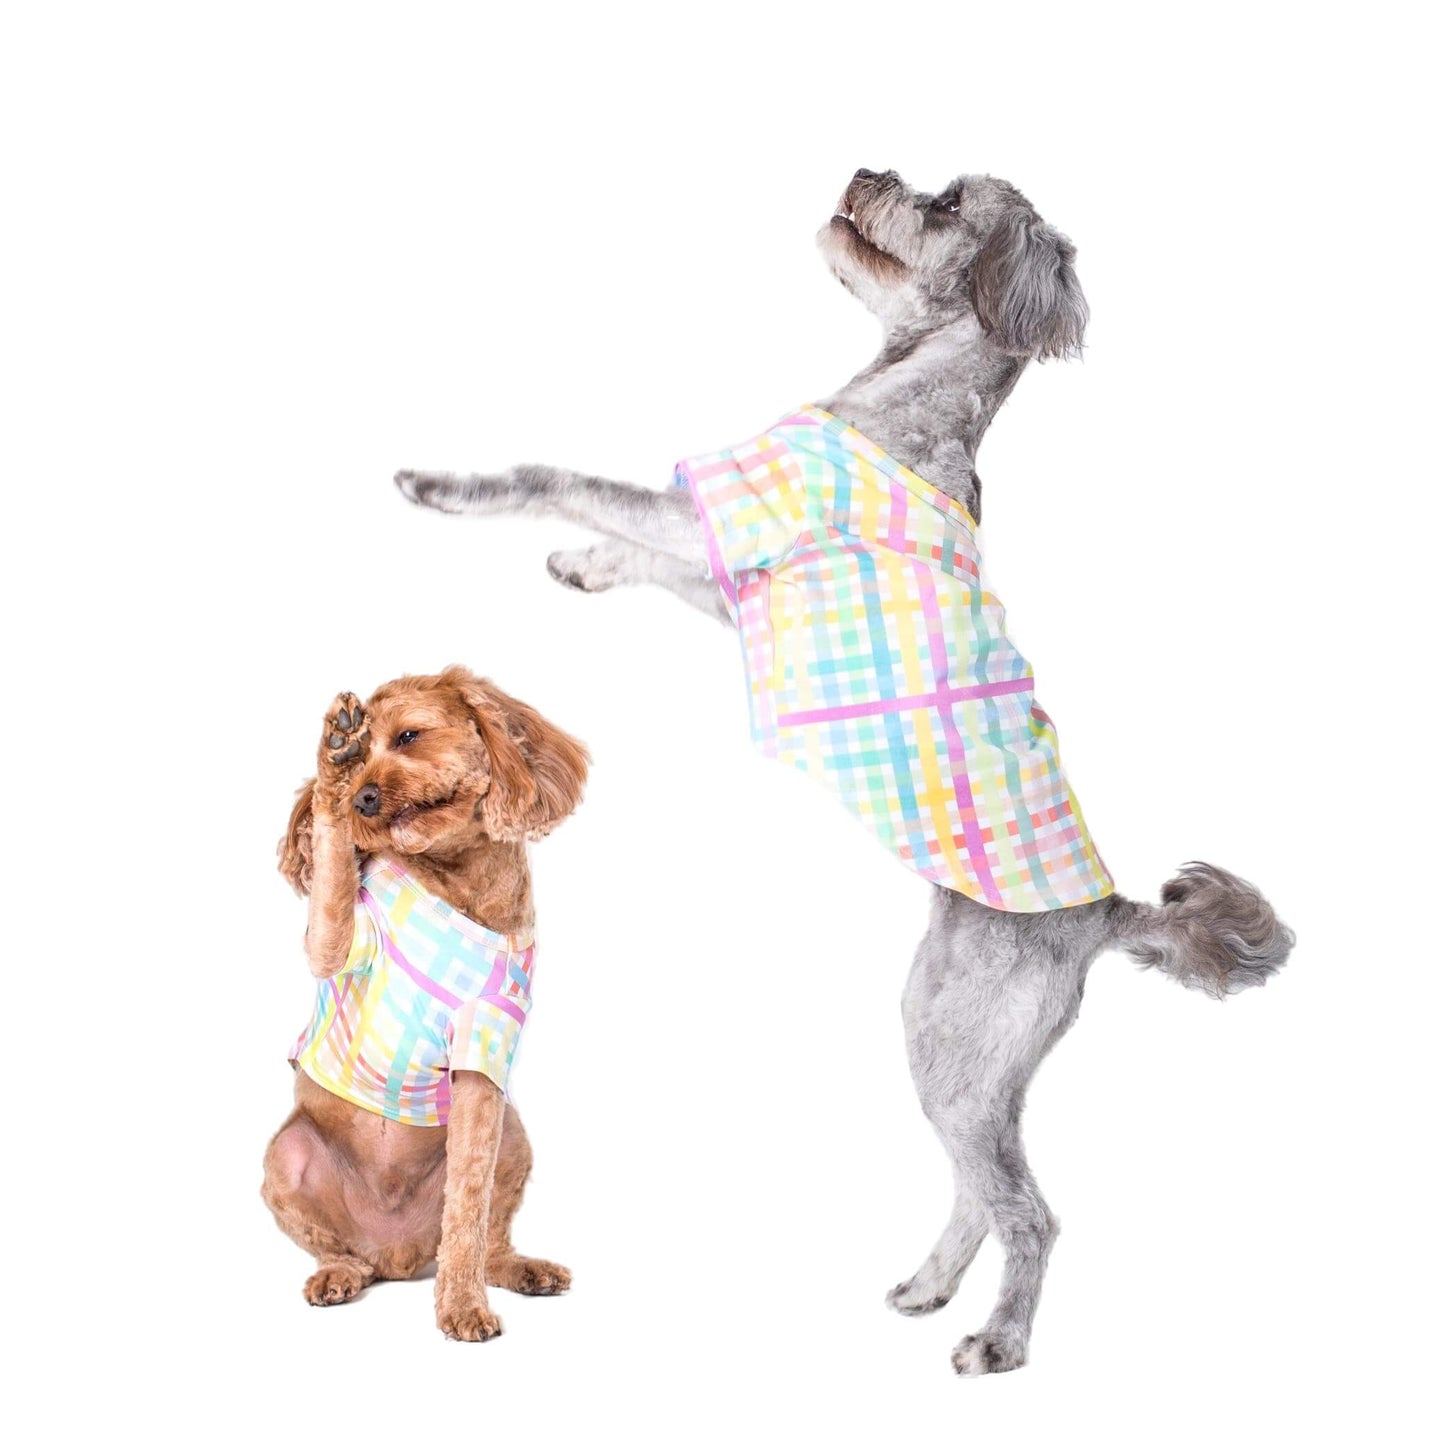 Two adorable cavoodle dogs in vibrant rainbow-colored gingham shirts, showcasing stylish dog shirts and clothing for dogs by Vibrant Hound.